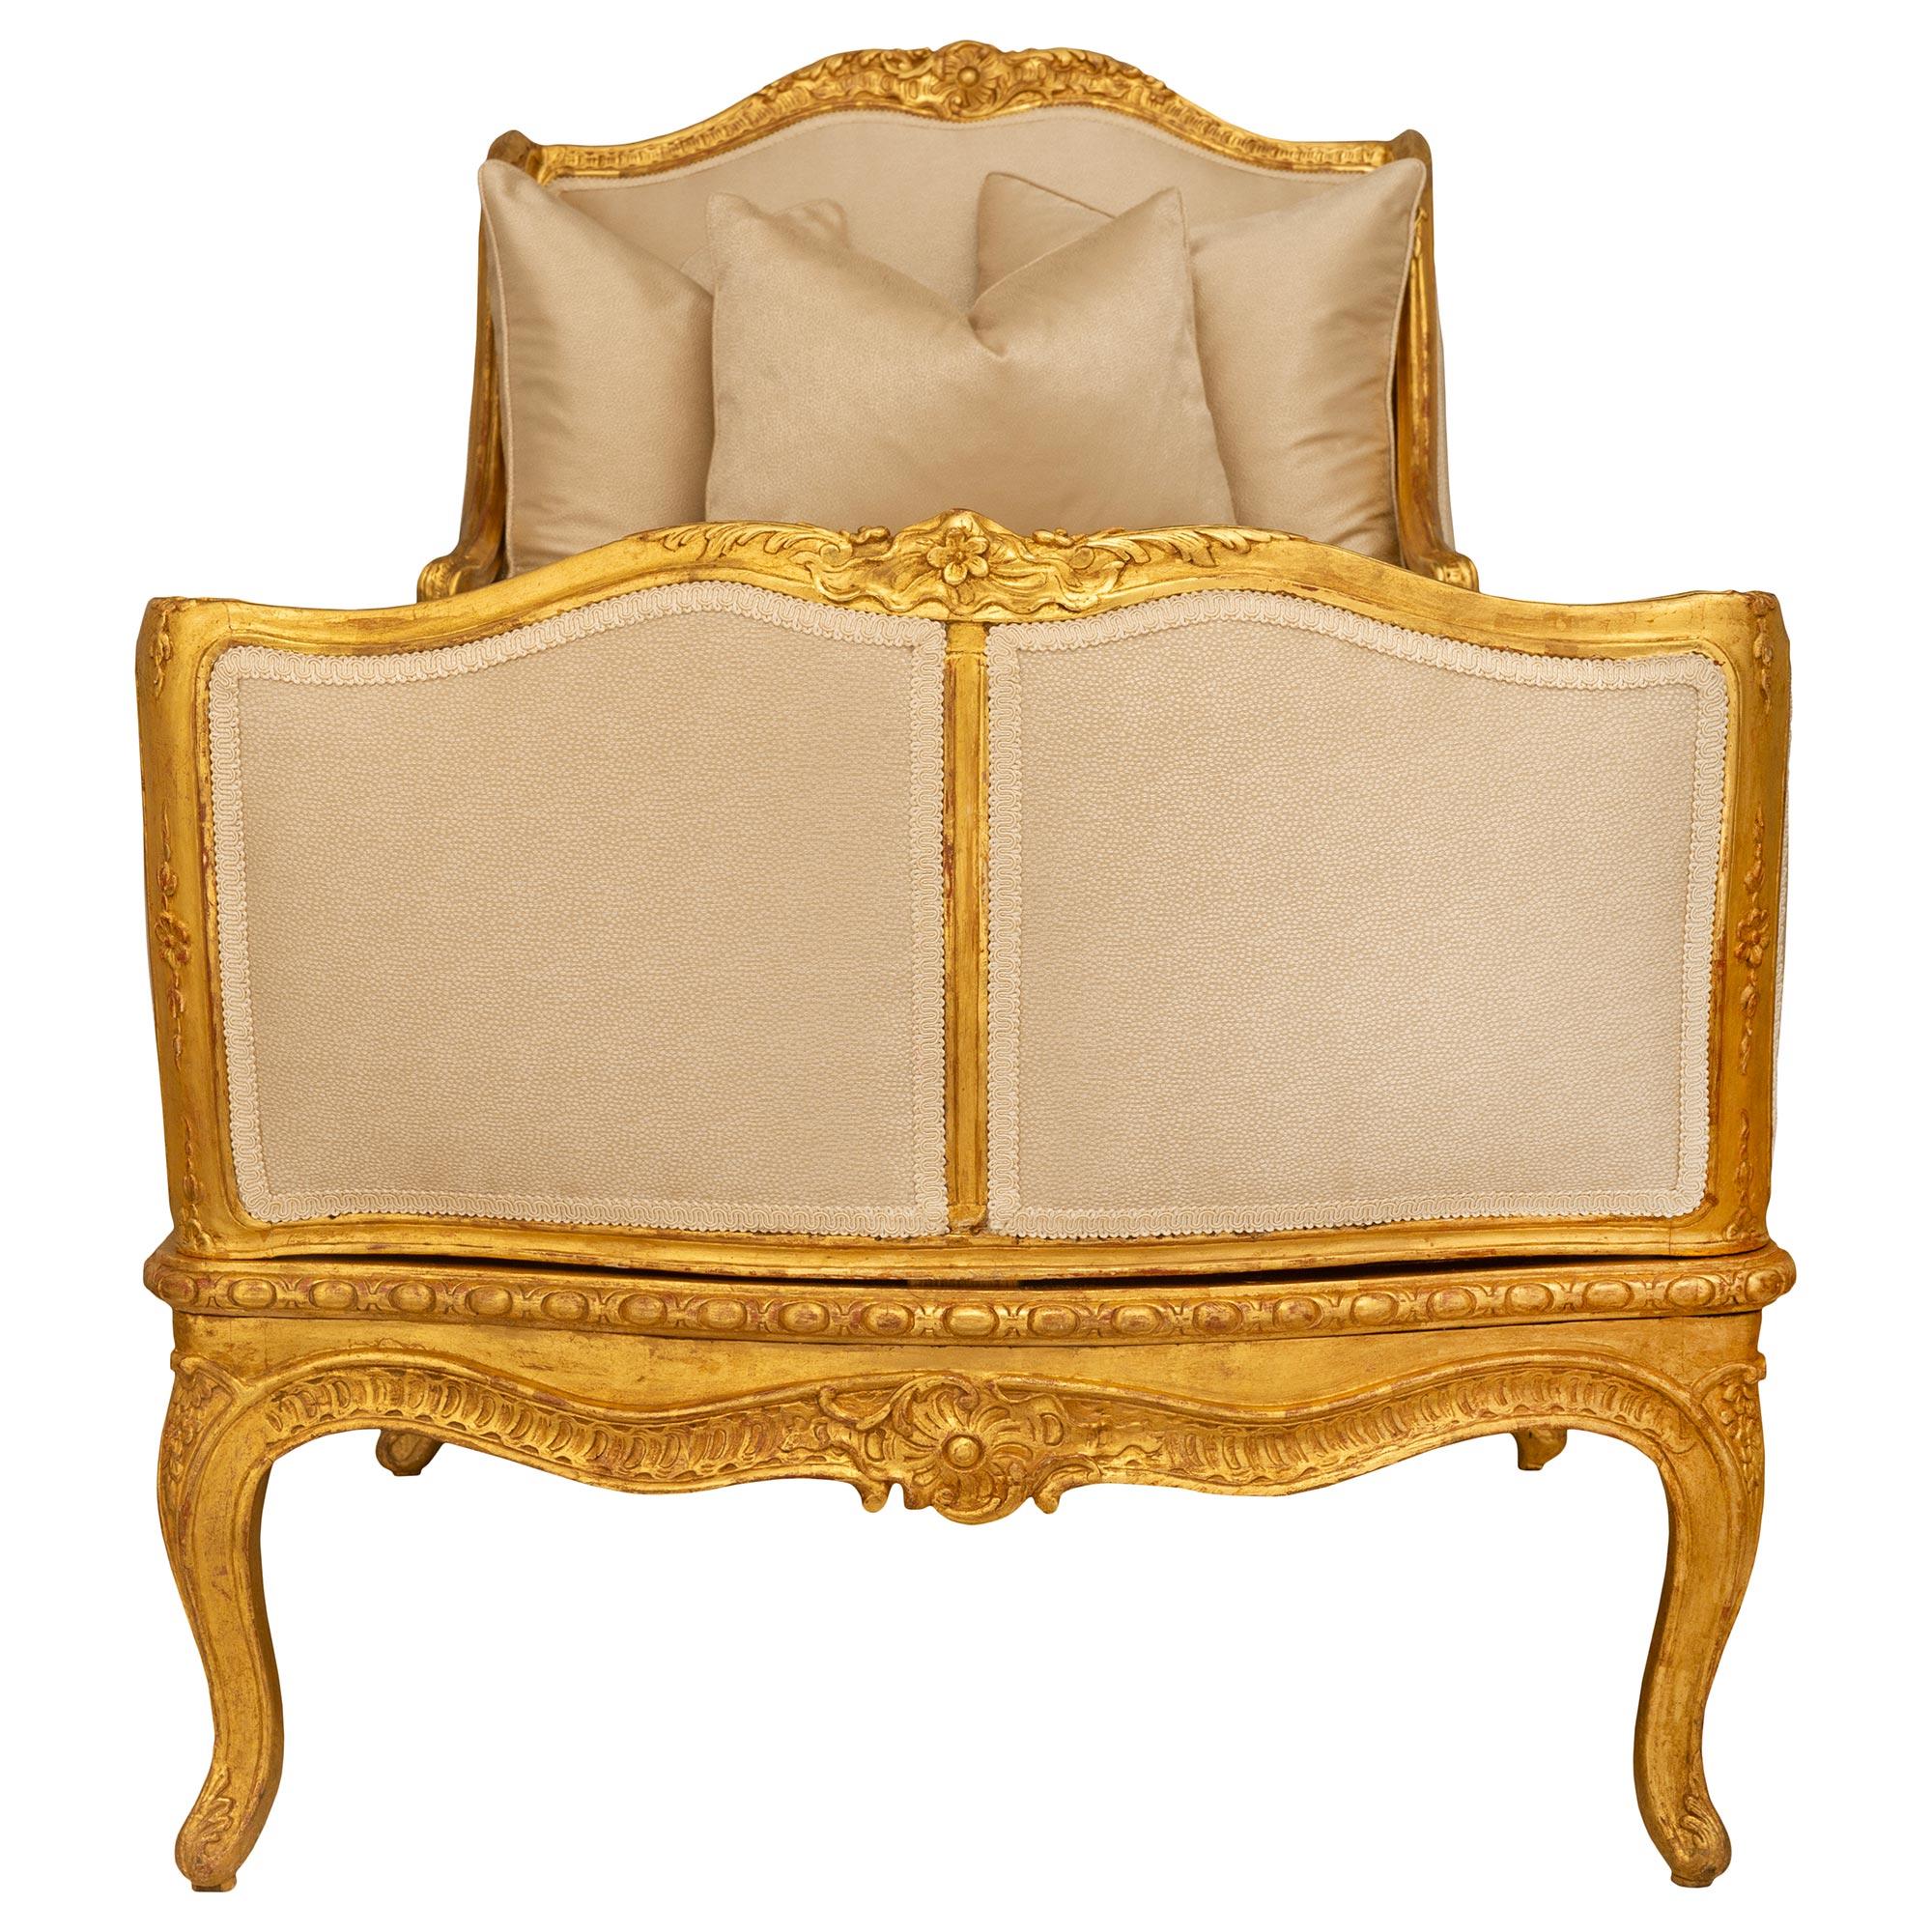 Regency A French early 19th century Regence st. recamier chaise For Sale